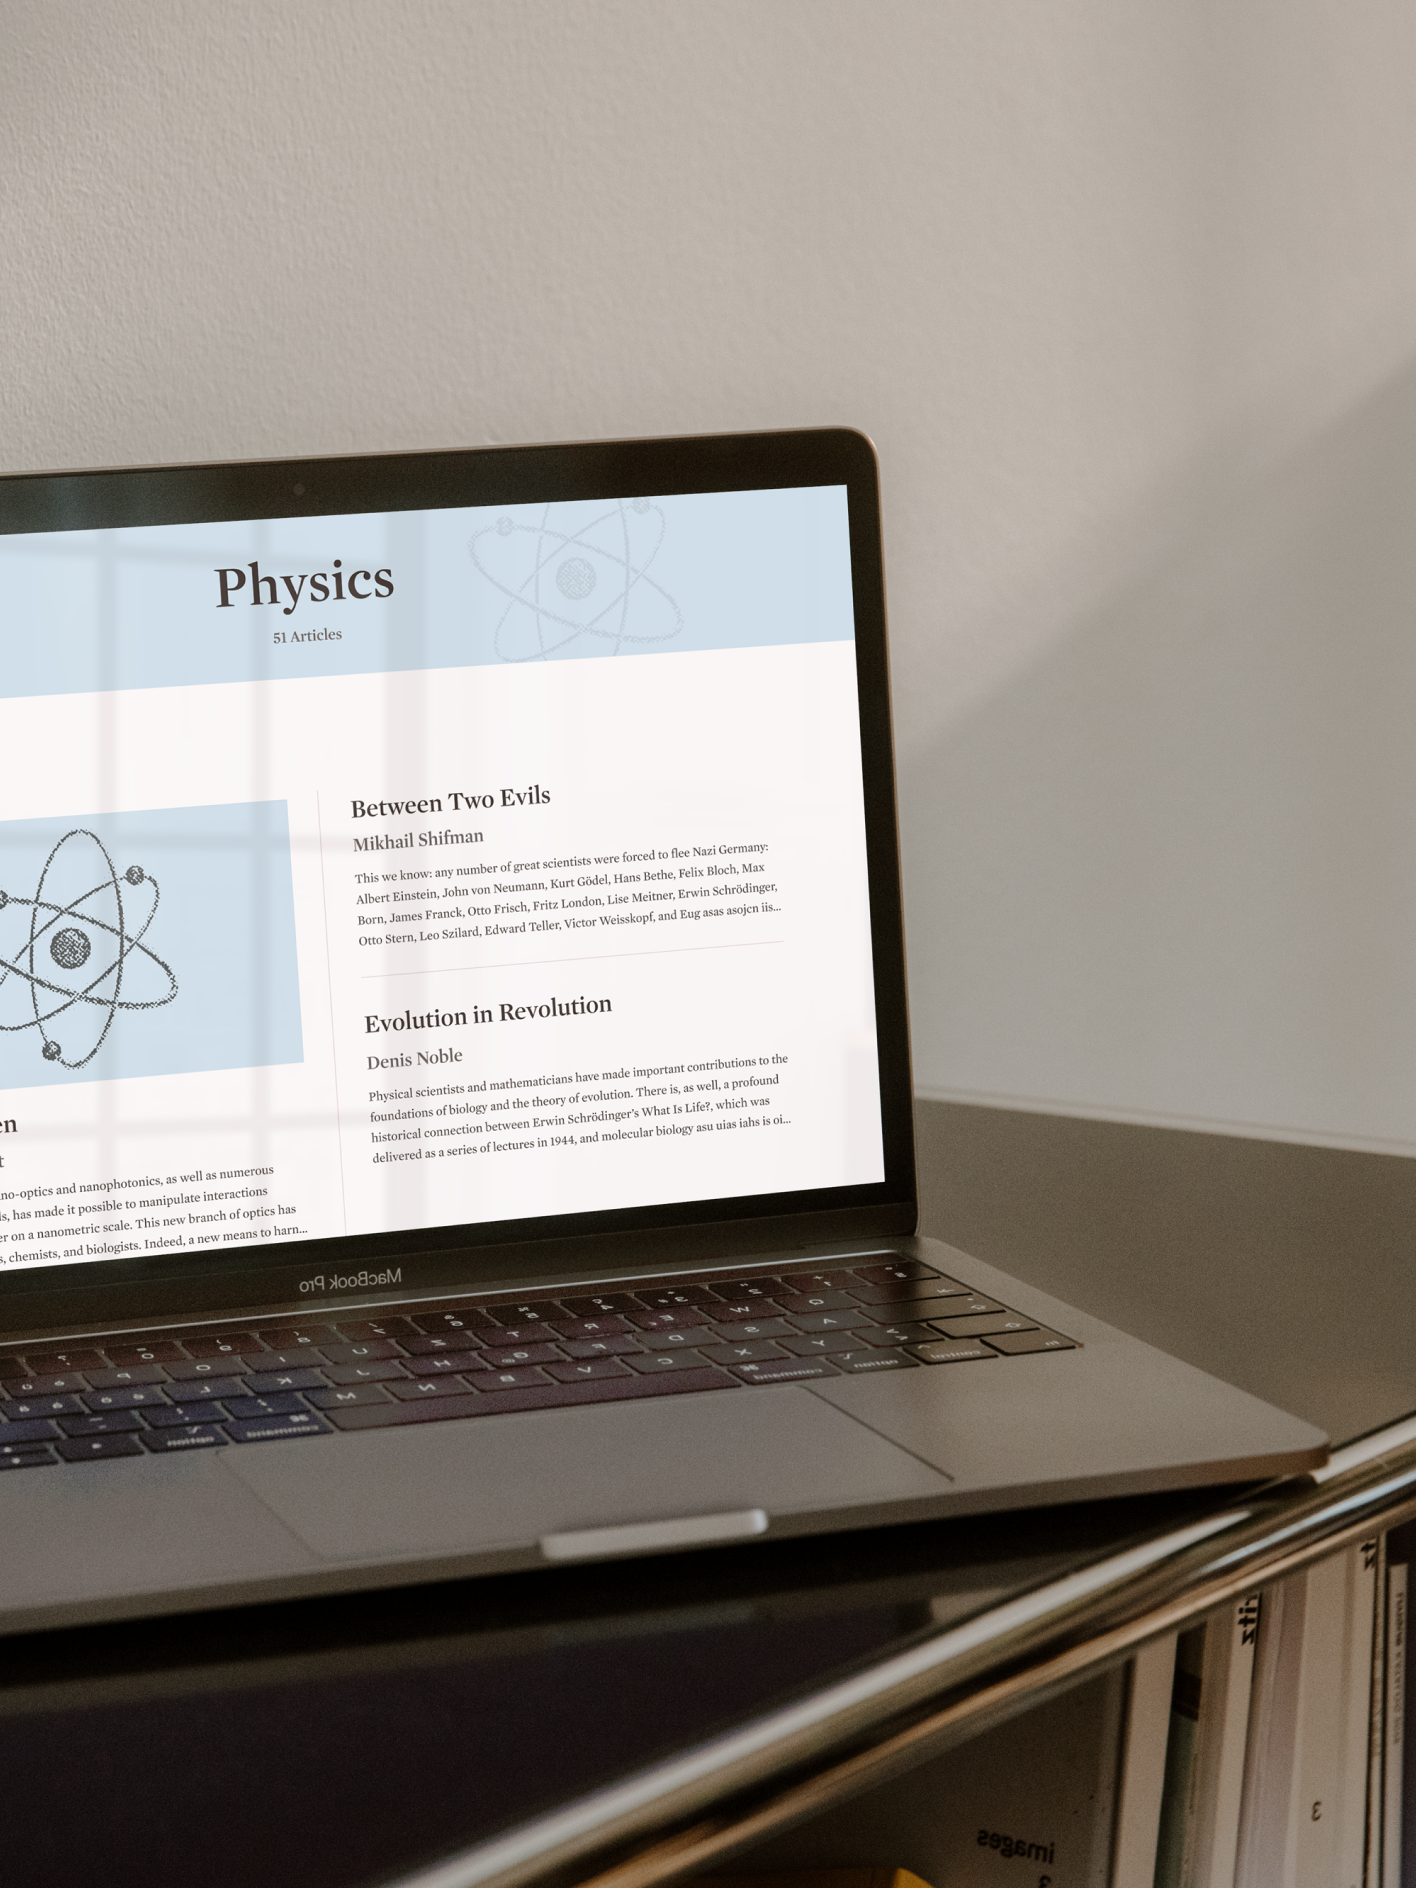 A desktop view showing all the articles inside a specific category (i.e. Physics)